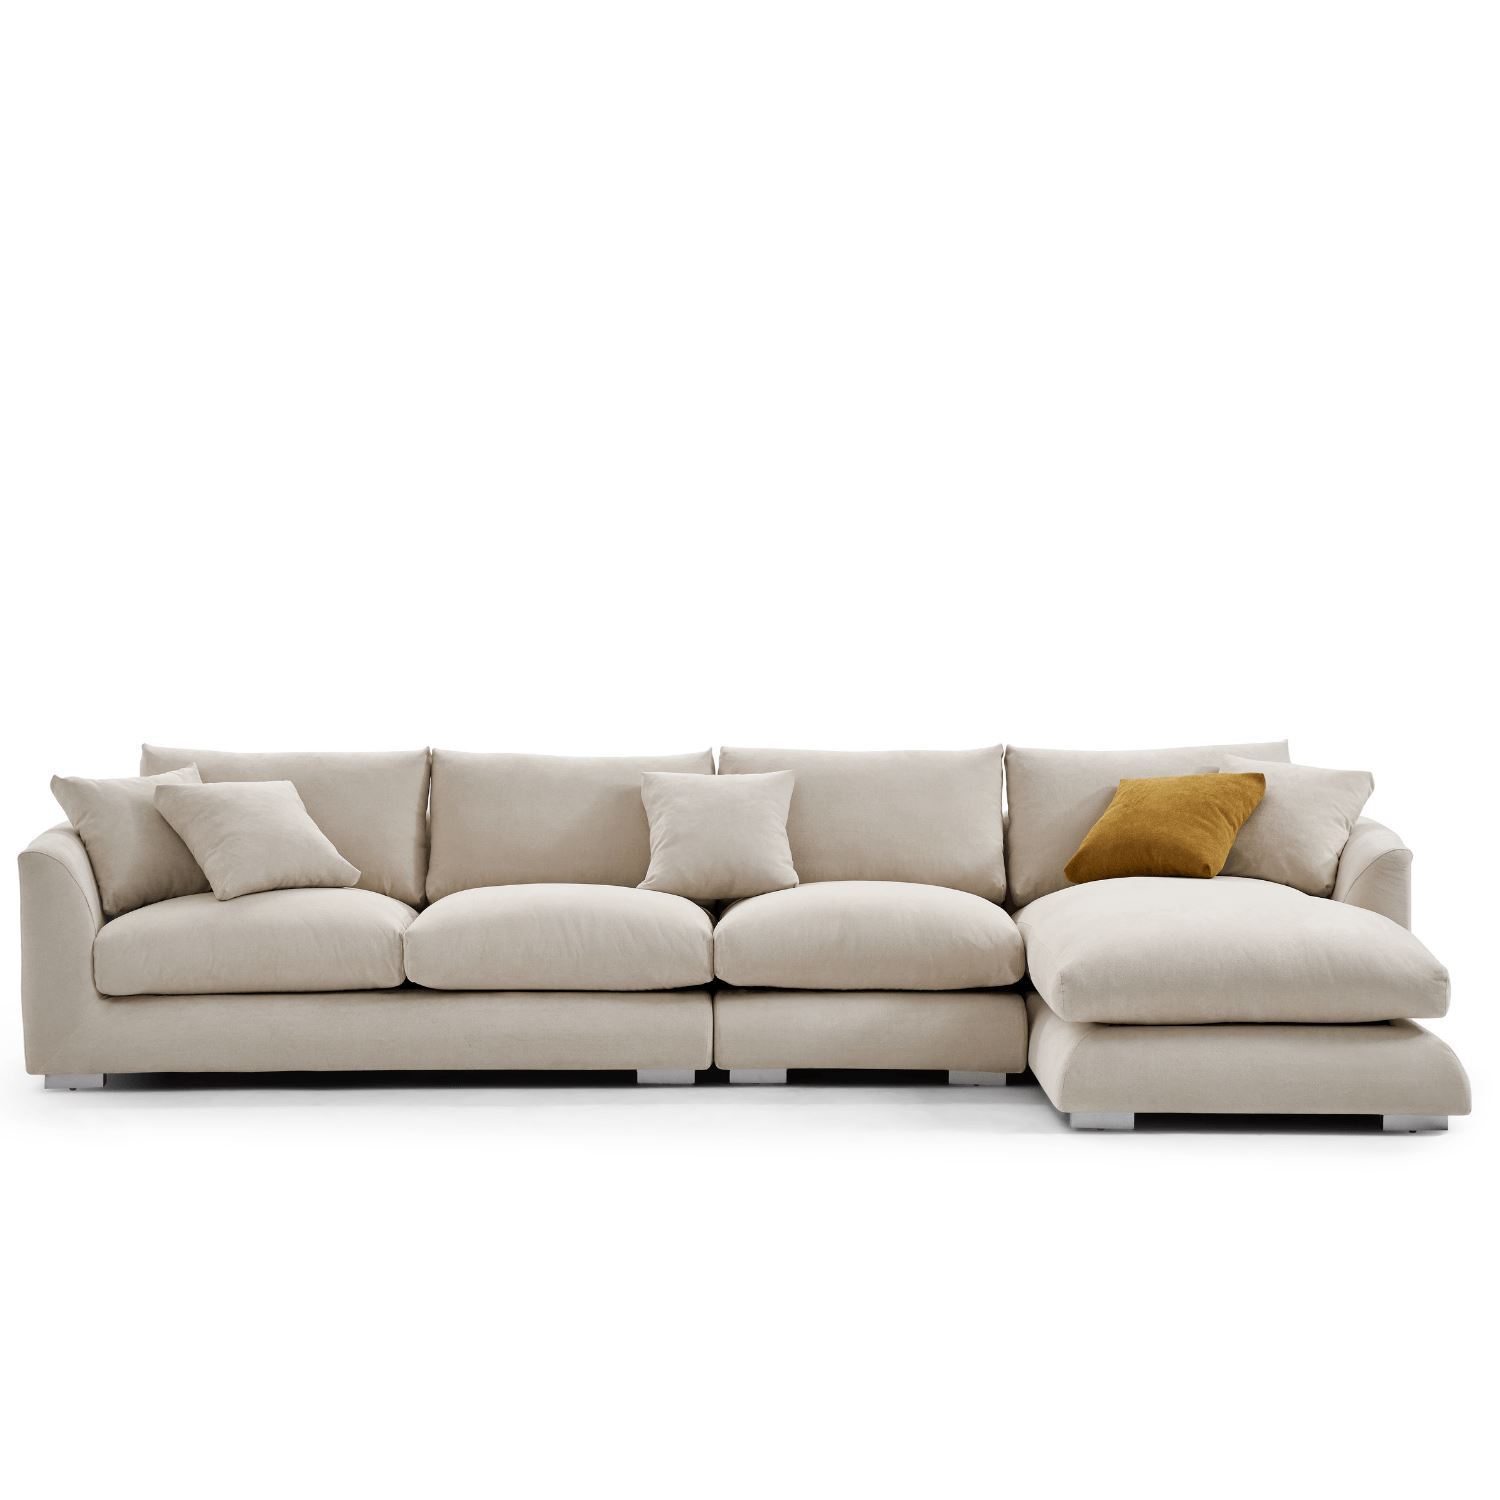 Feathers Sectional Sofa Mario Capasa Beige 142 inch Facing Right